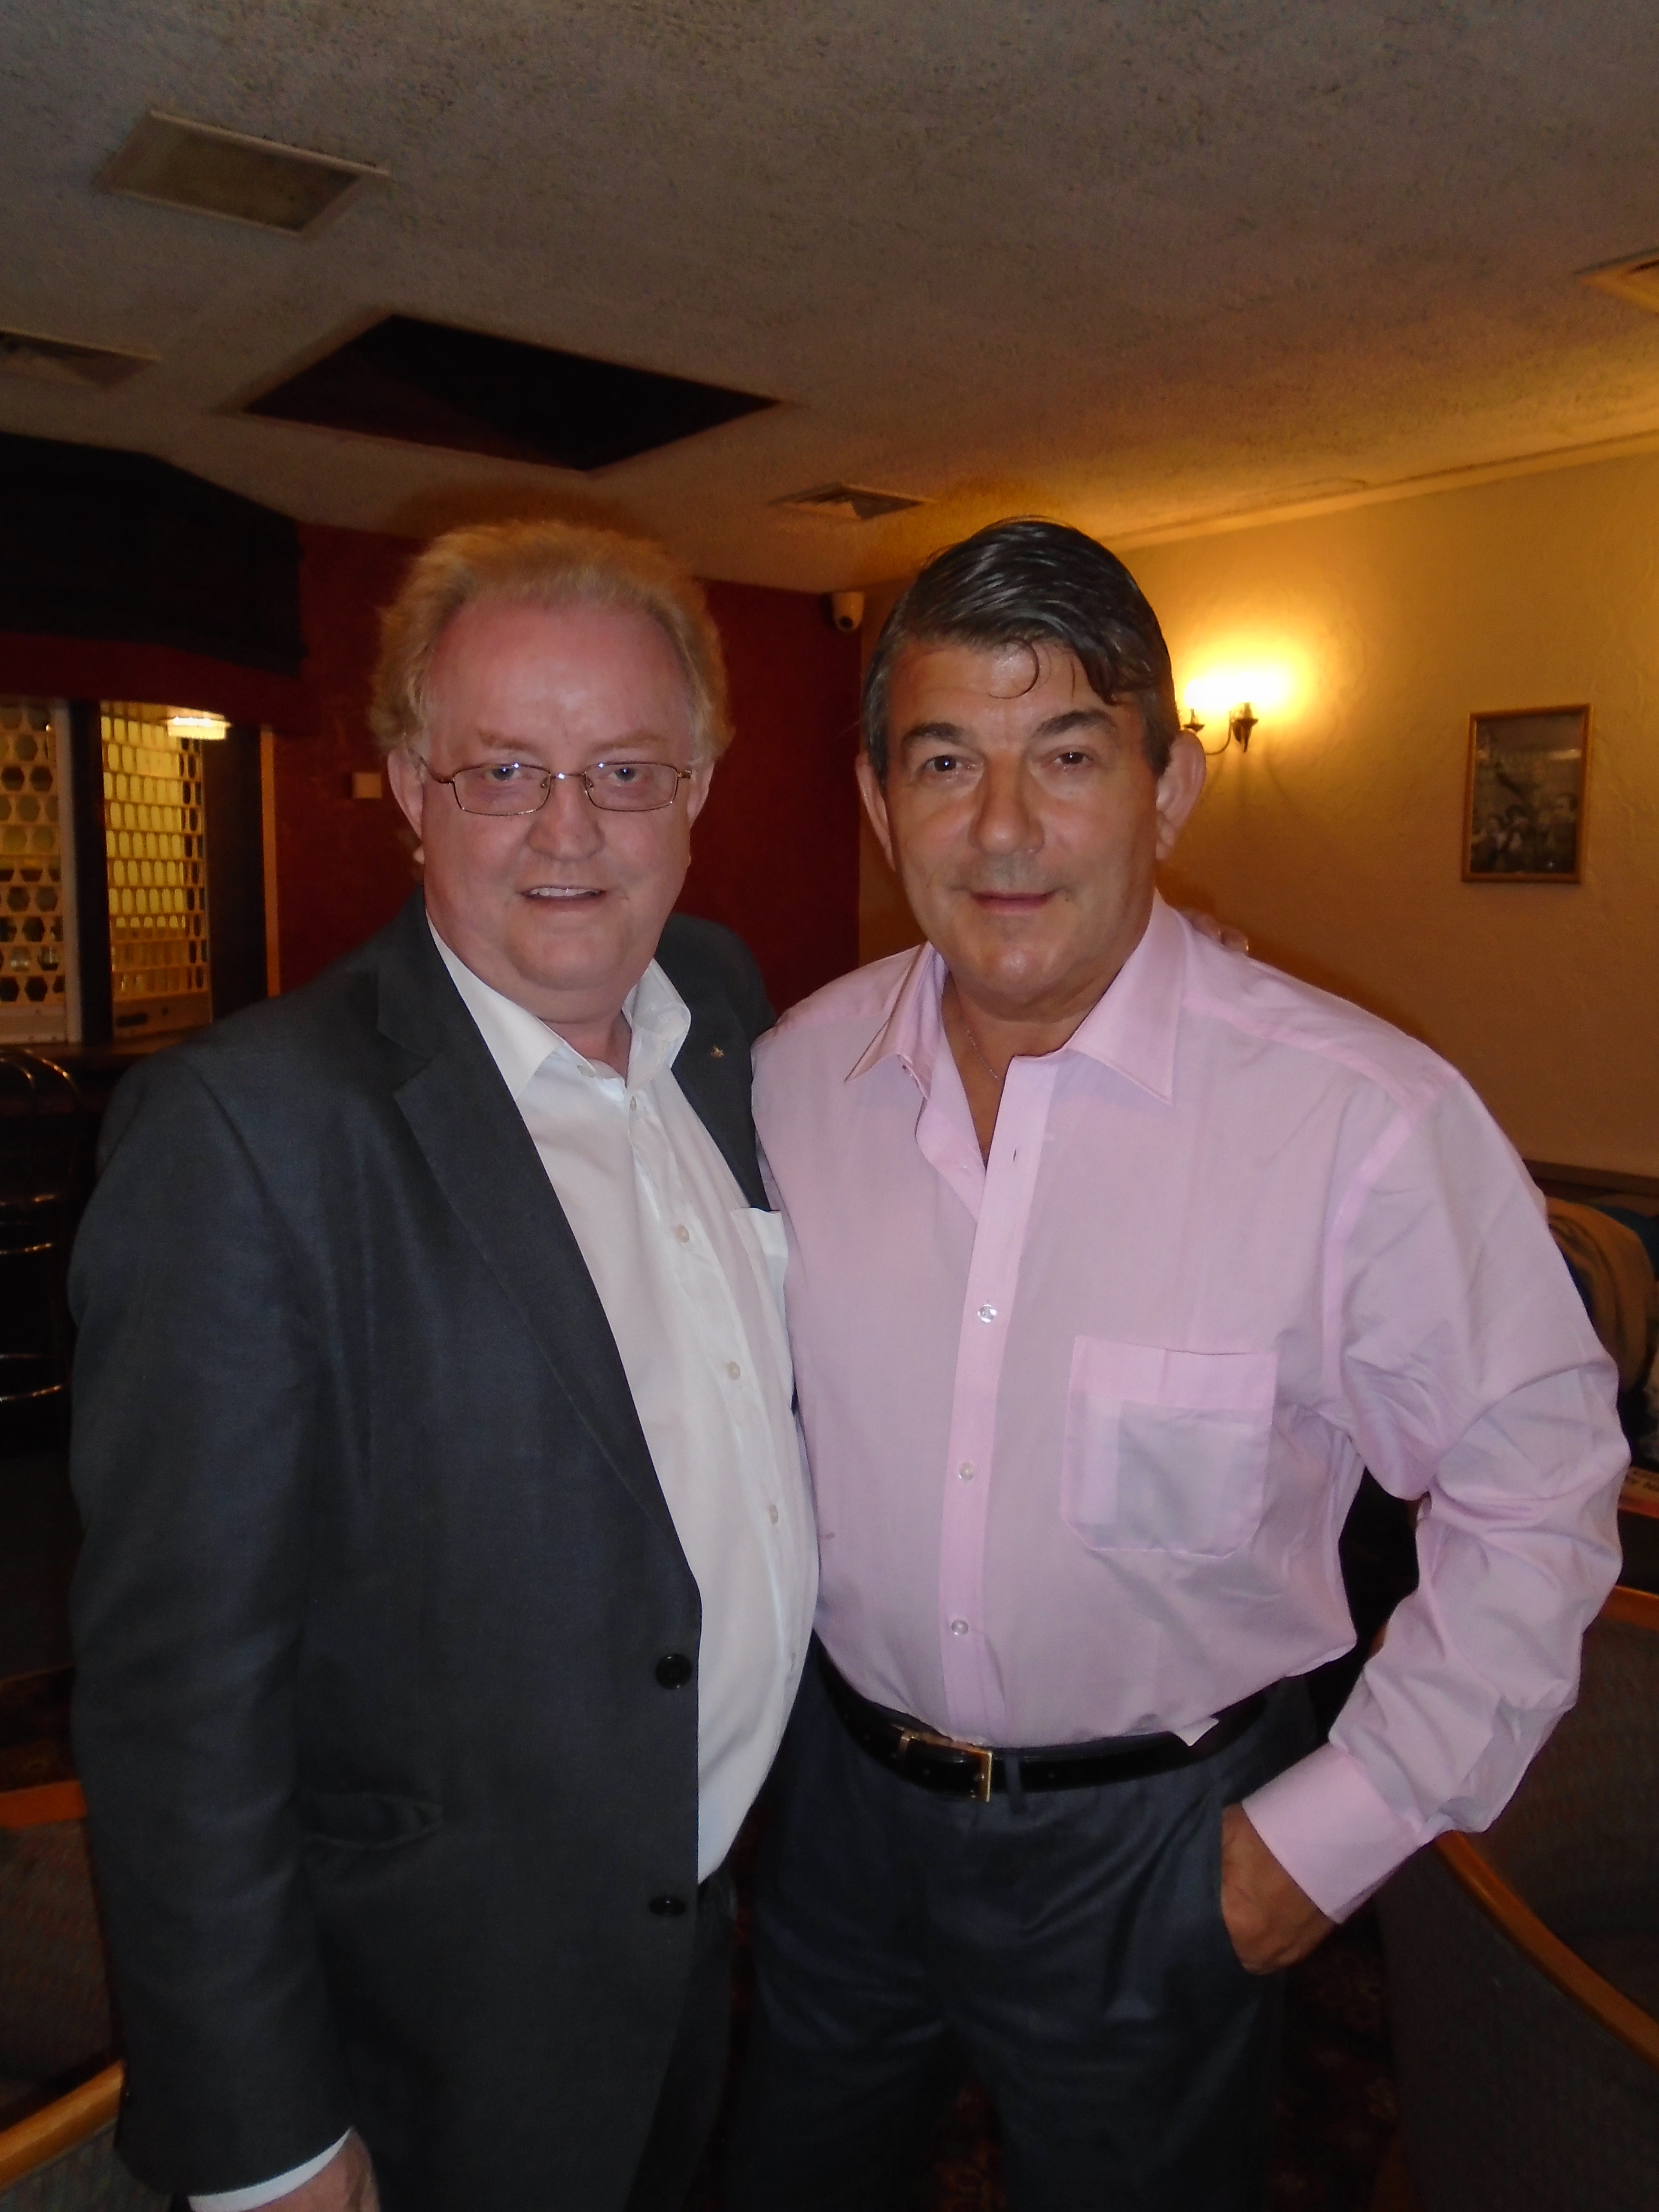 Martin Pennell with actor John Altman on the project Perfect Break,